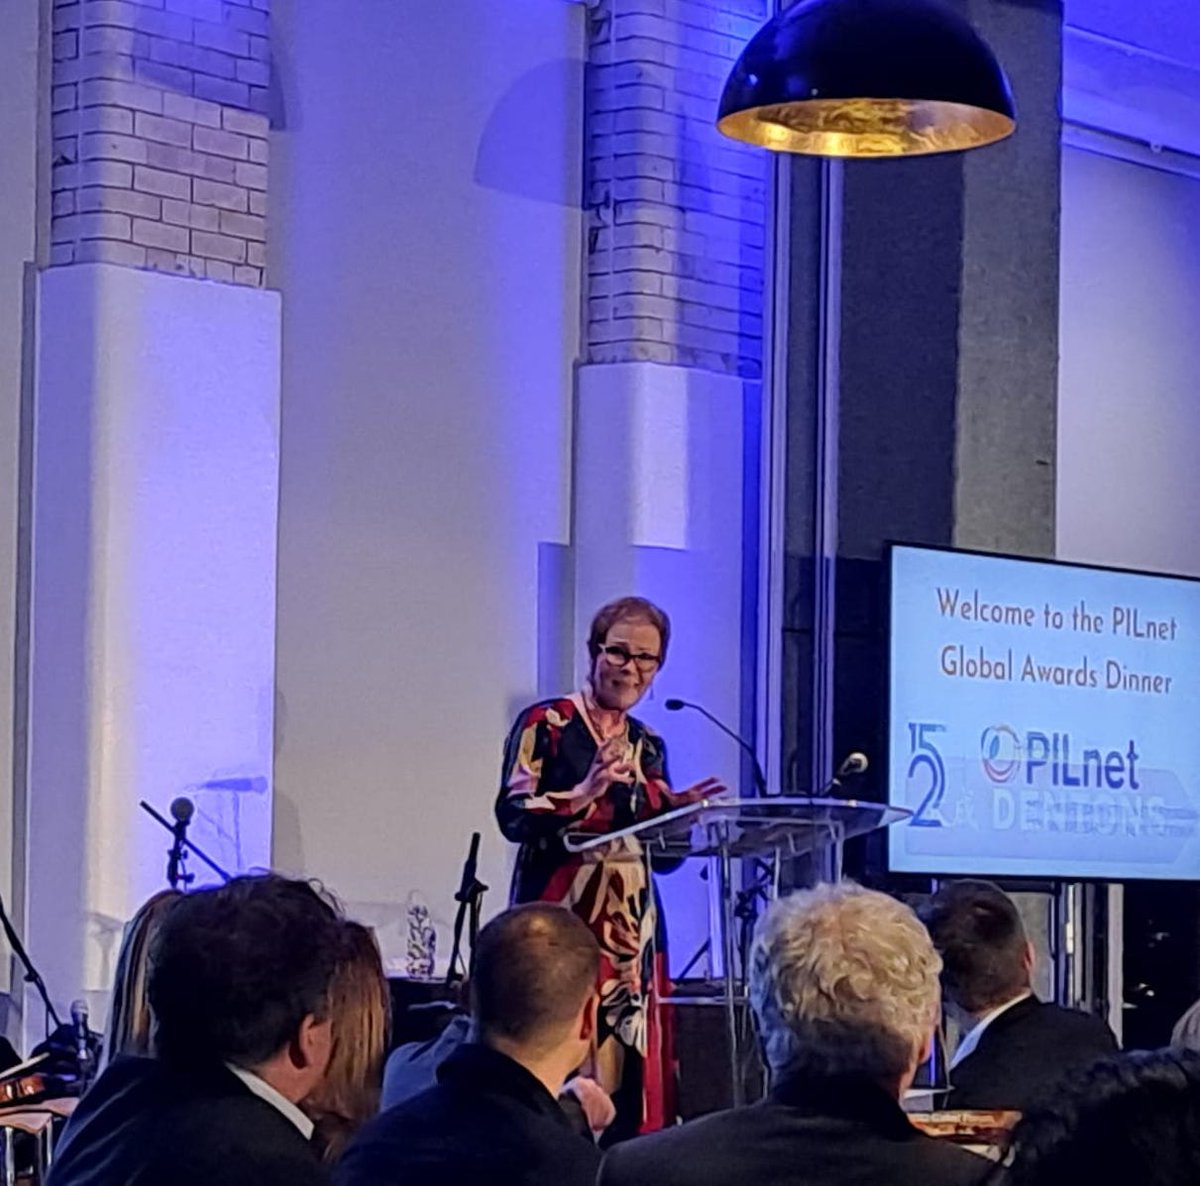 Lovely news from @PILnet Global Awards tonight where our @Noeline_B has received the Pro Bono Publico award for her work in promoting law in the public interest - so well deserved for her tireless efforts across a range of issues 👏👏👏💜💜💜